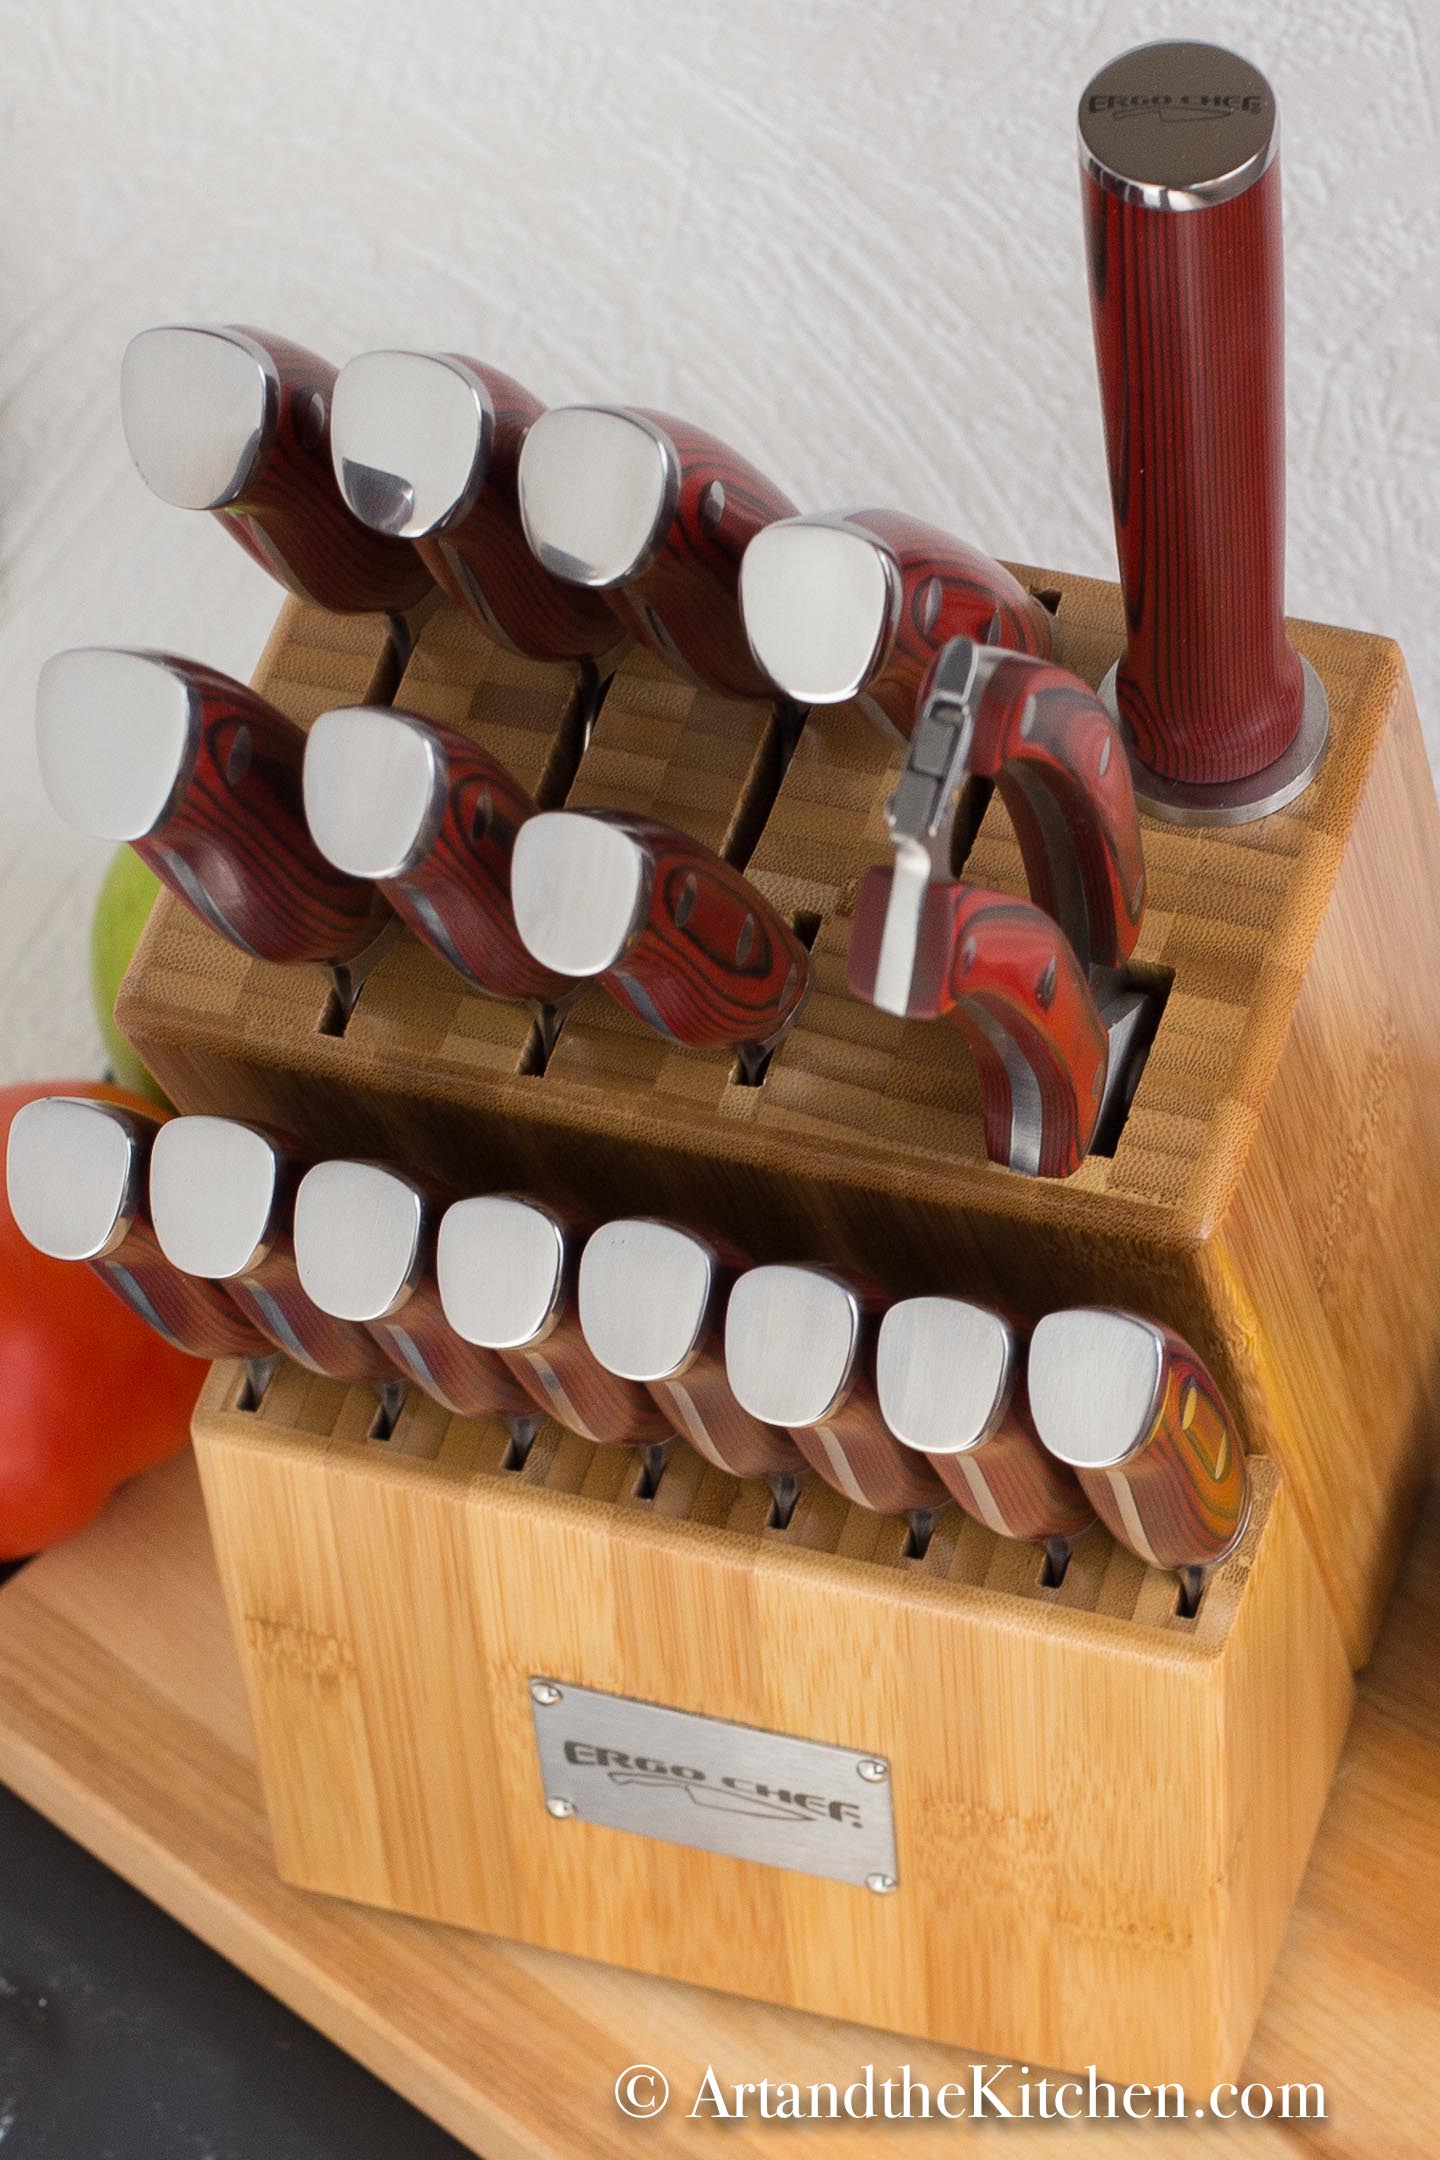 Wood knife block filled with set of knives on wood cutting board with fruit and vegetables in background.